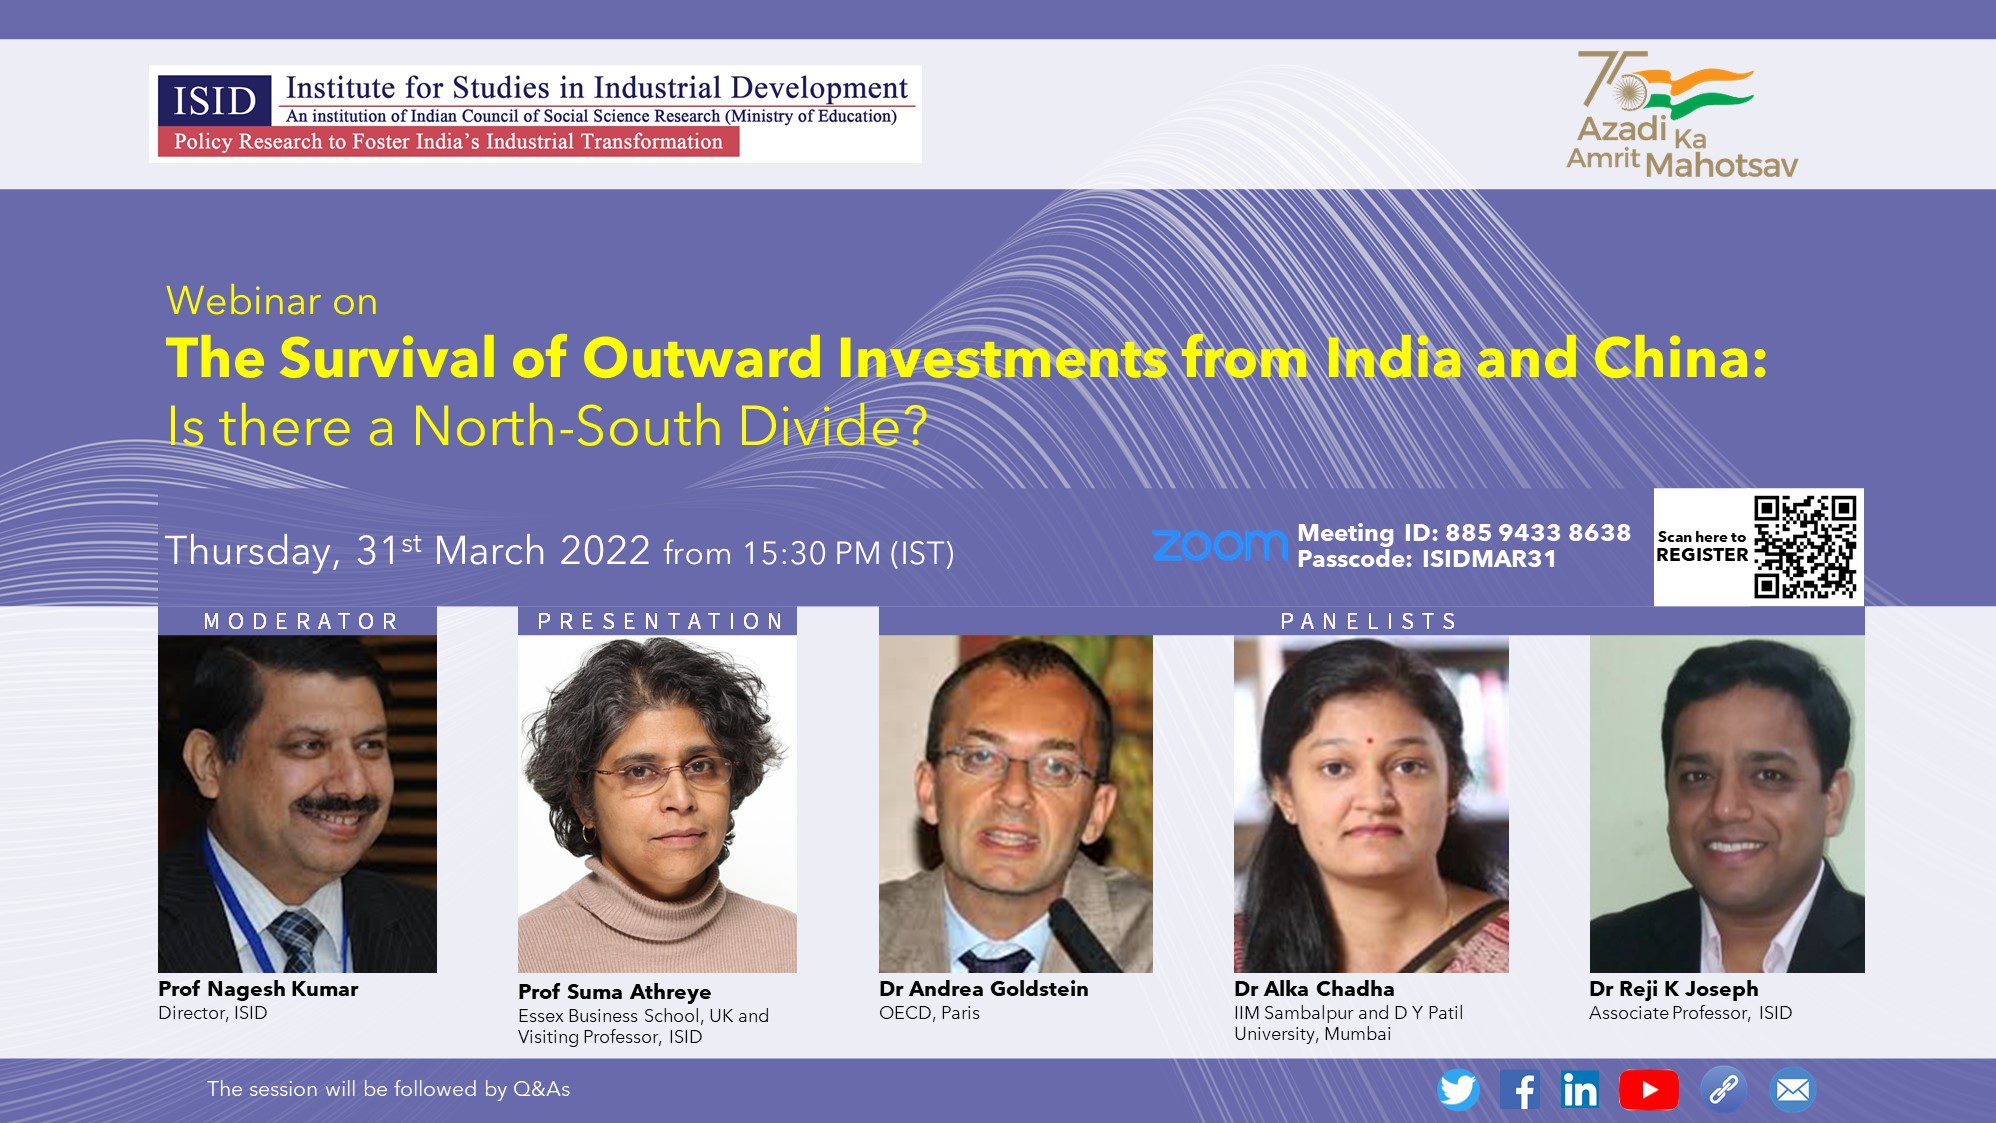 ISID Webinar on The Survival of Outward Investments from India and China